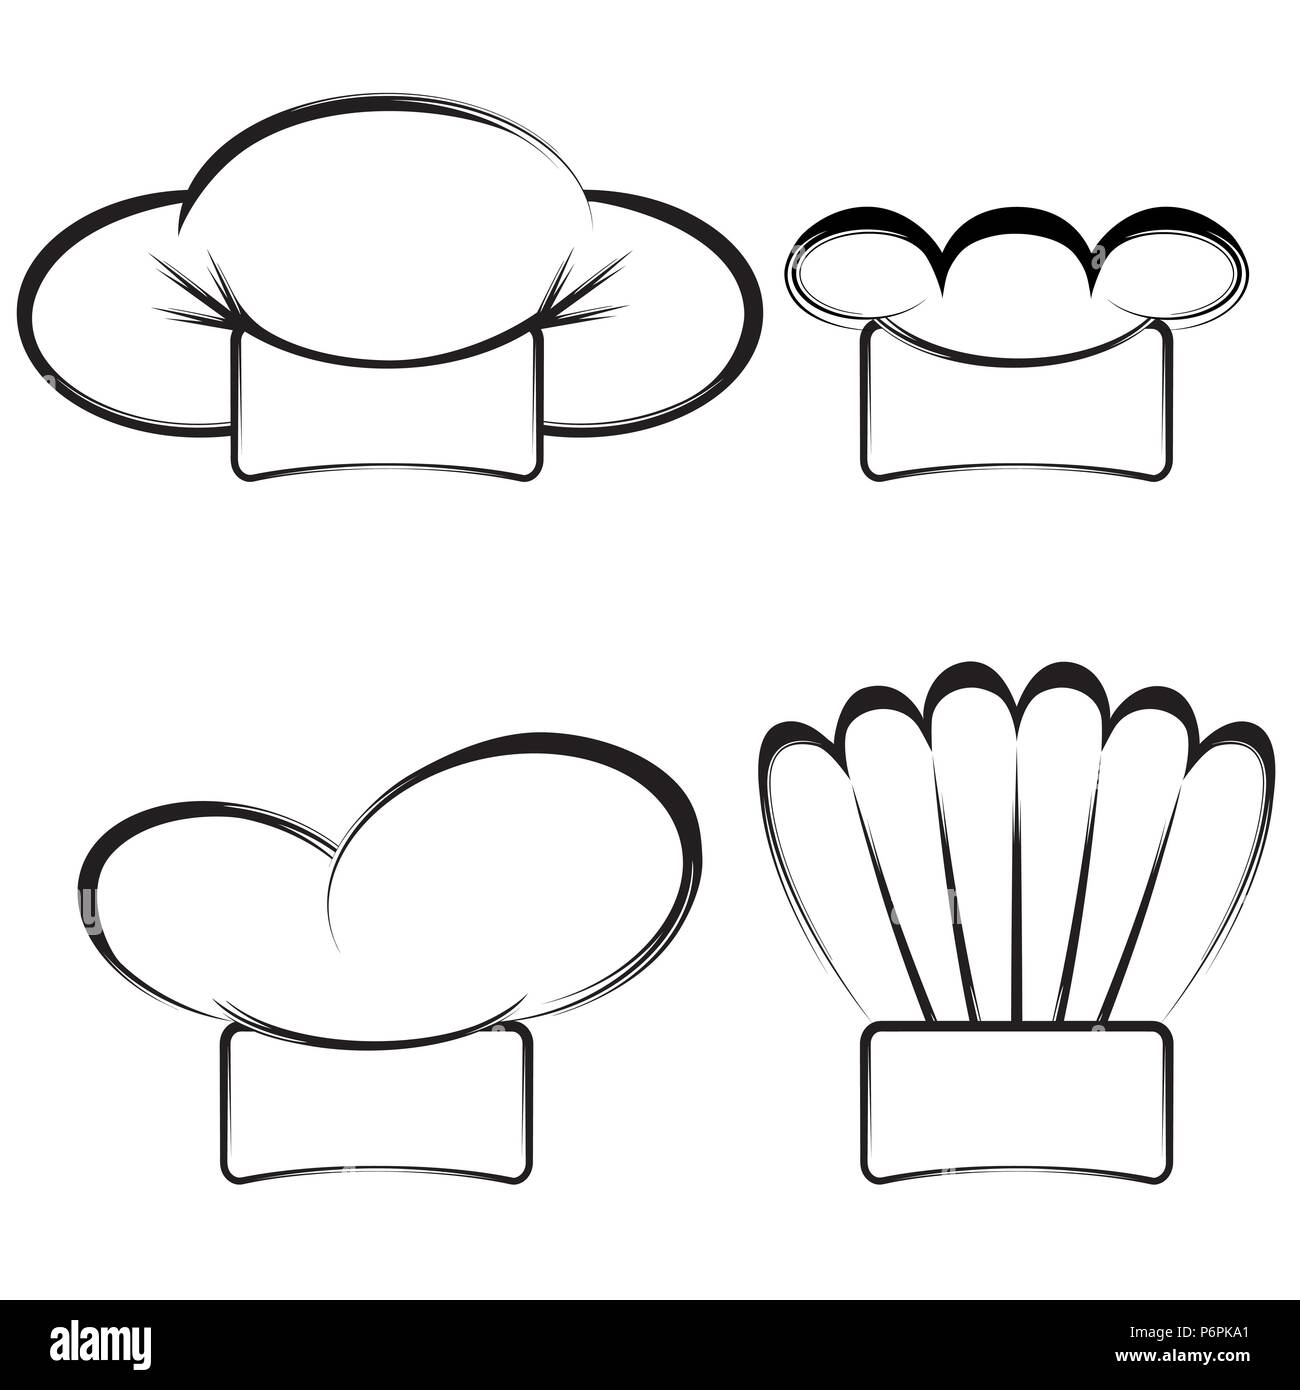 Collection of chef's hats on a white background.Black and white Stock Vector